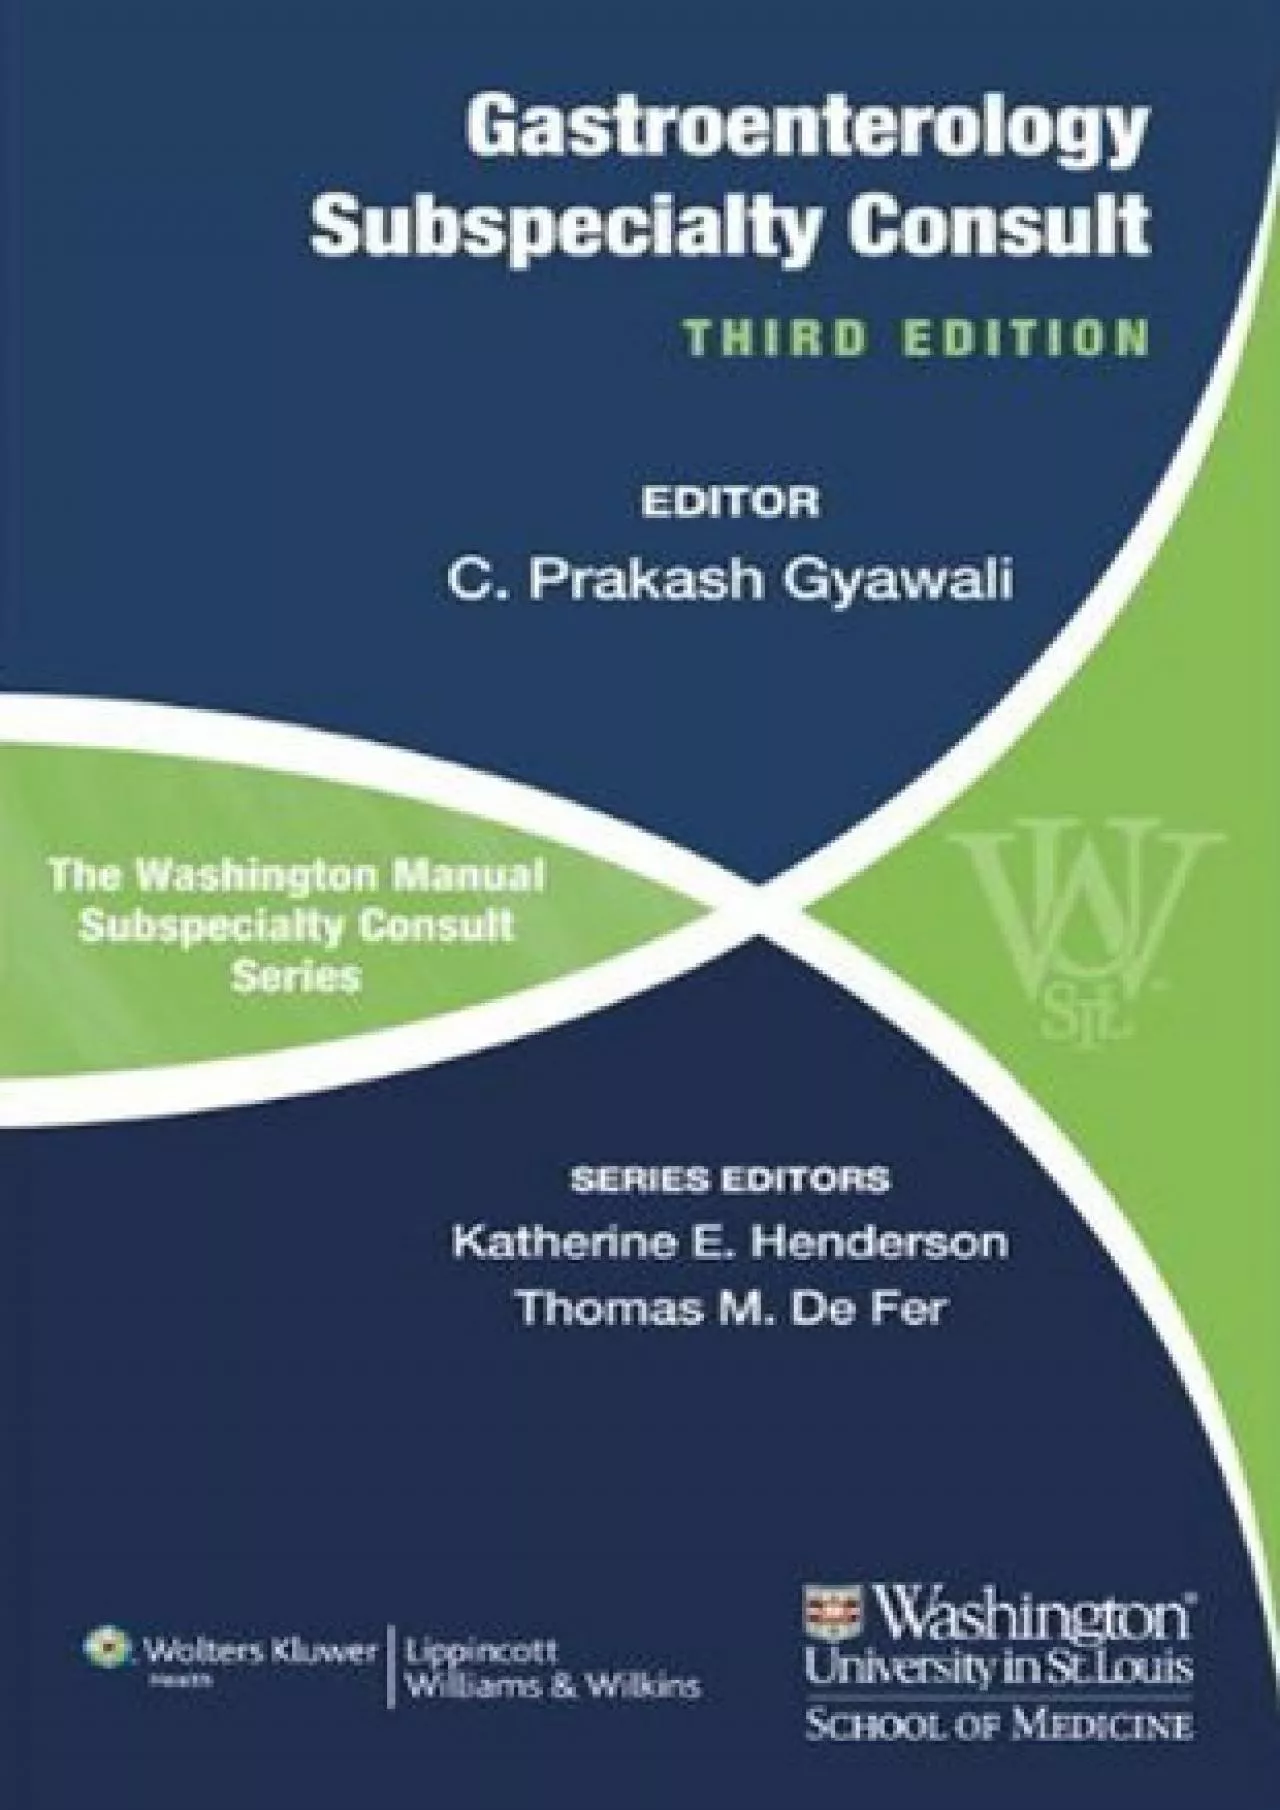 (DOWNLOAD)-The Washington Manual of Gastroenterology Subspecialty Consult (The Washington